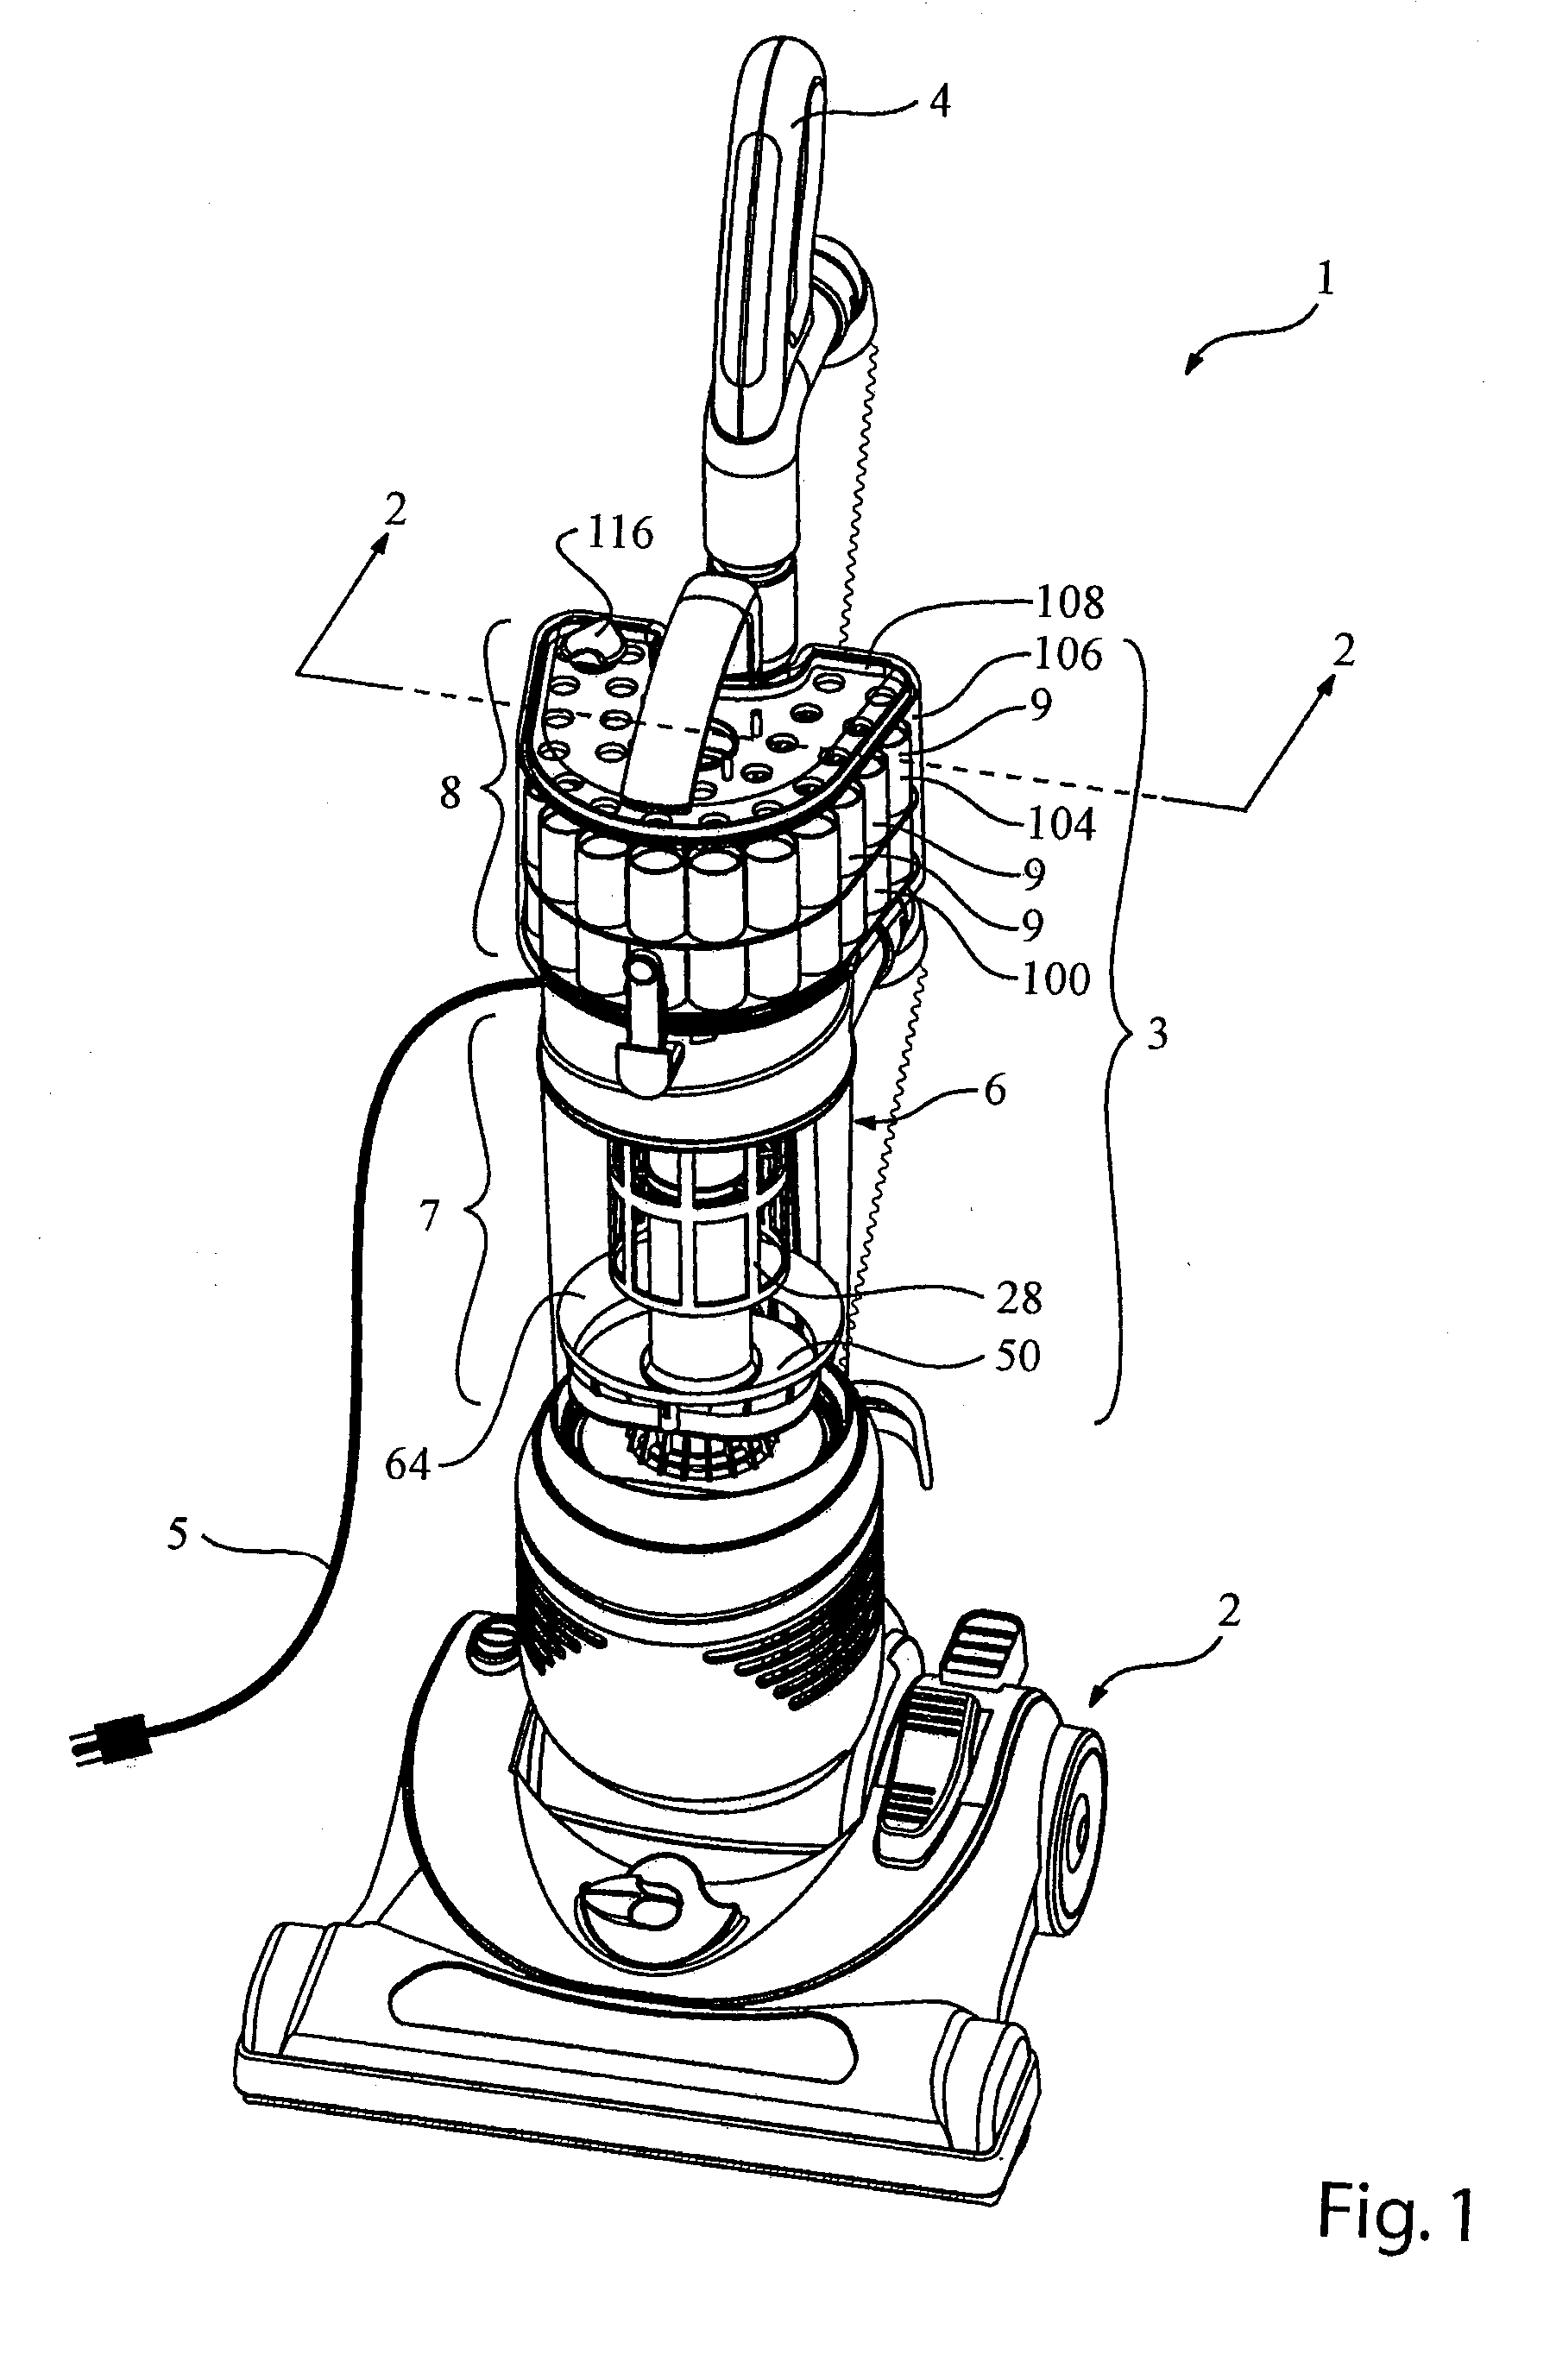 Vacuum cleaner with a plurality of cyclonic cleaning stages